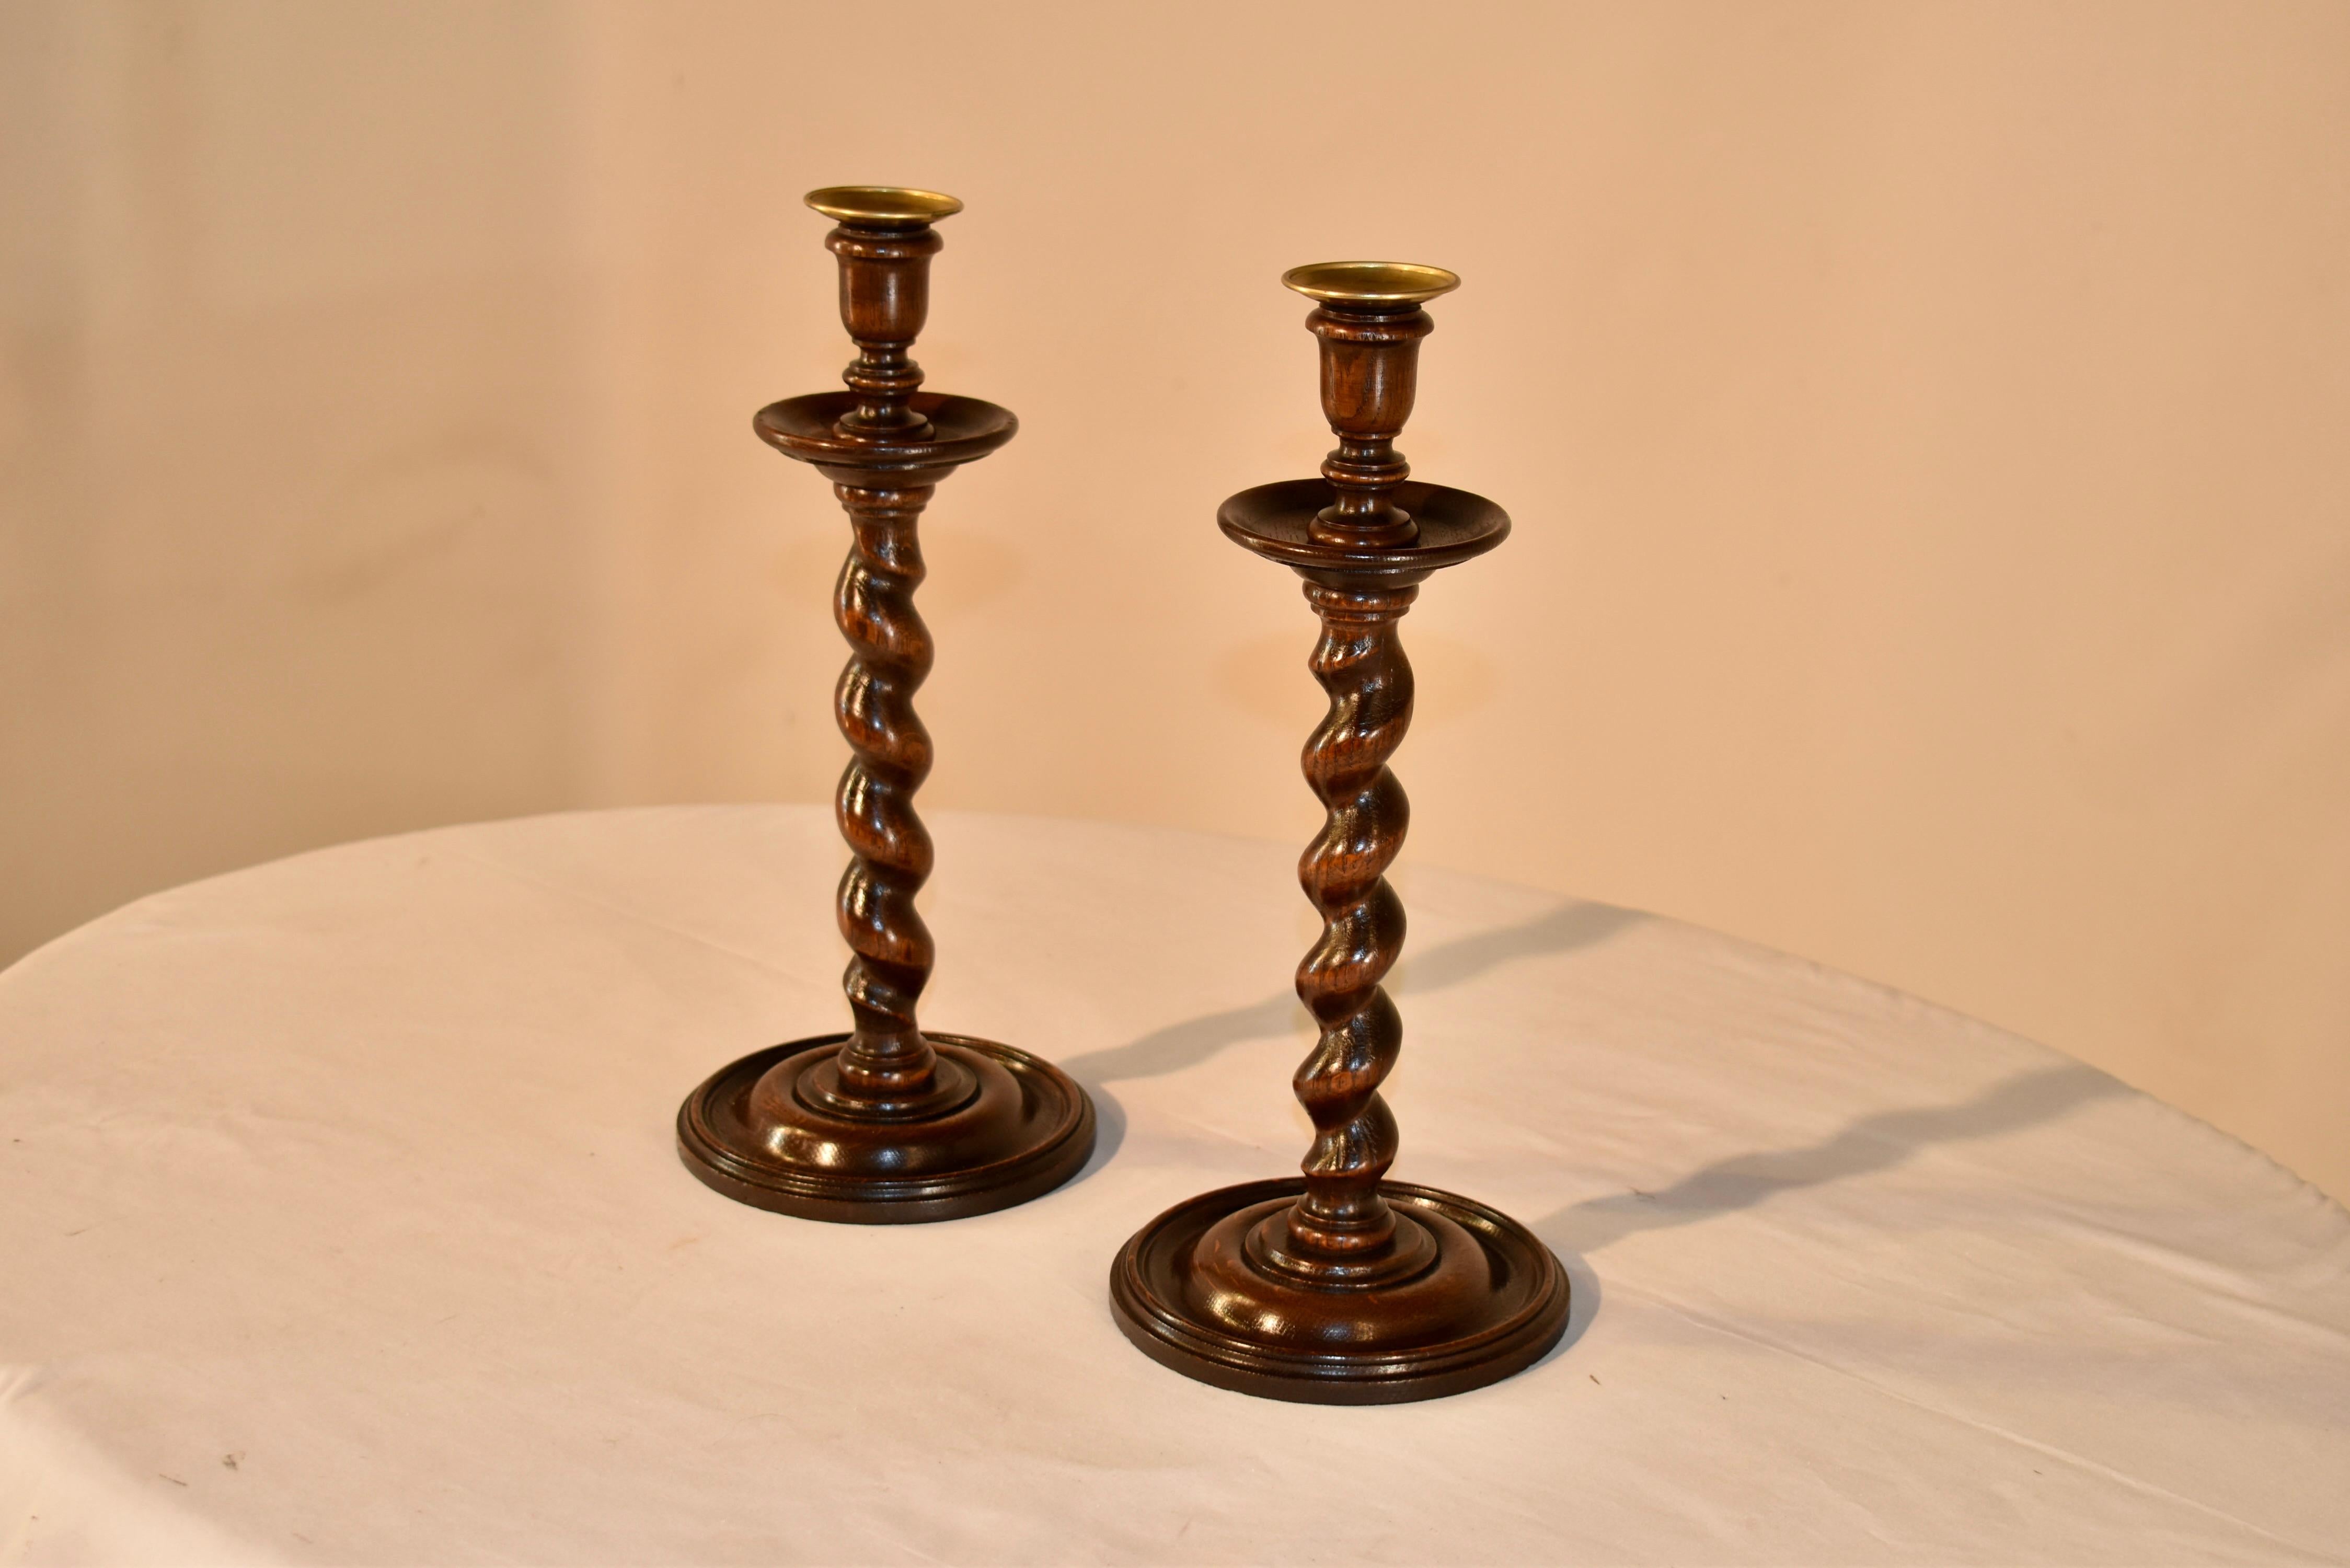 Pair of 19th century oak candlesticks from England with brass inserts inside hand turned candle cups over wonderfully large bobeches and supported on hand turned barley twist stems over hand turned and molded bases. Wonderfully tall at 14 inches in